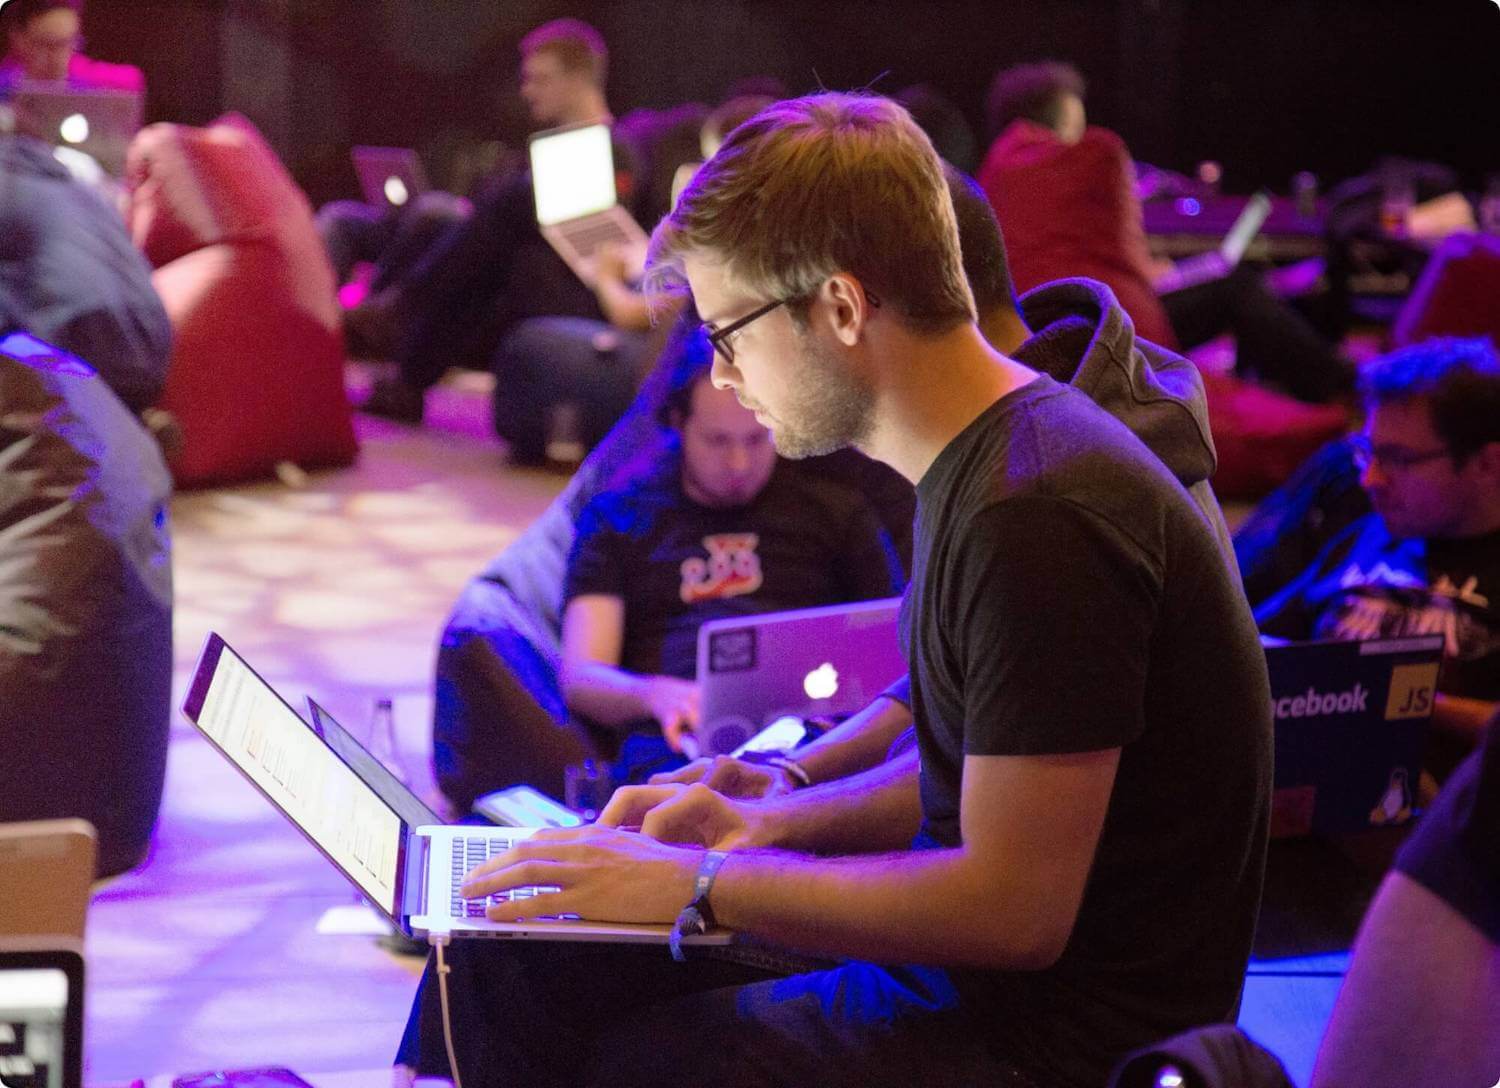 Cyber security developer using laptop to work at conference